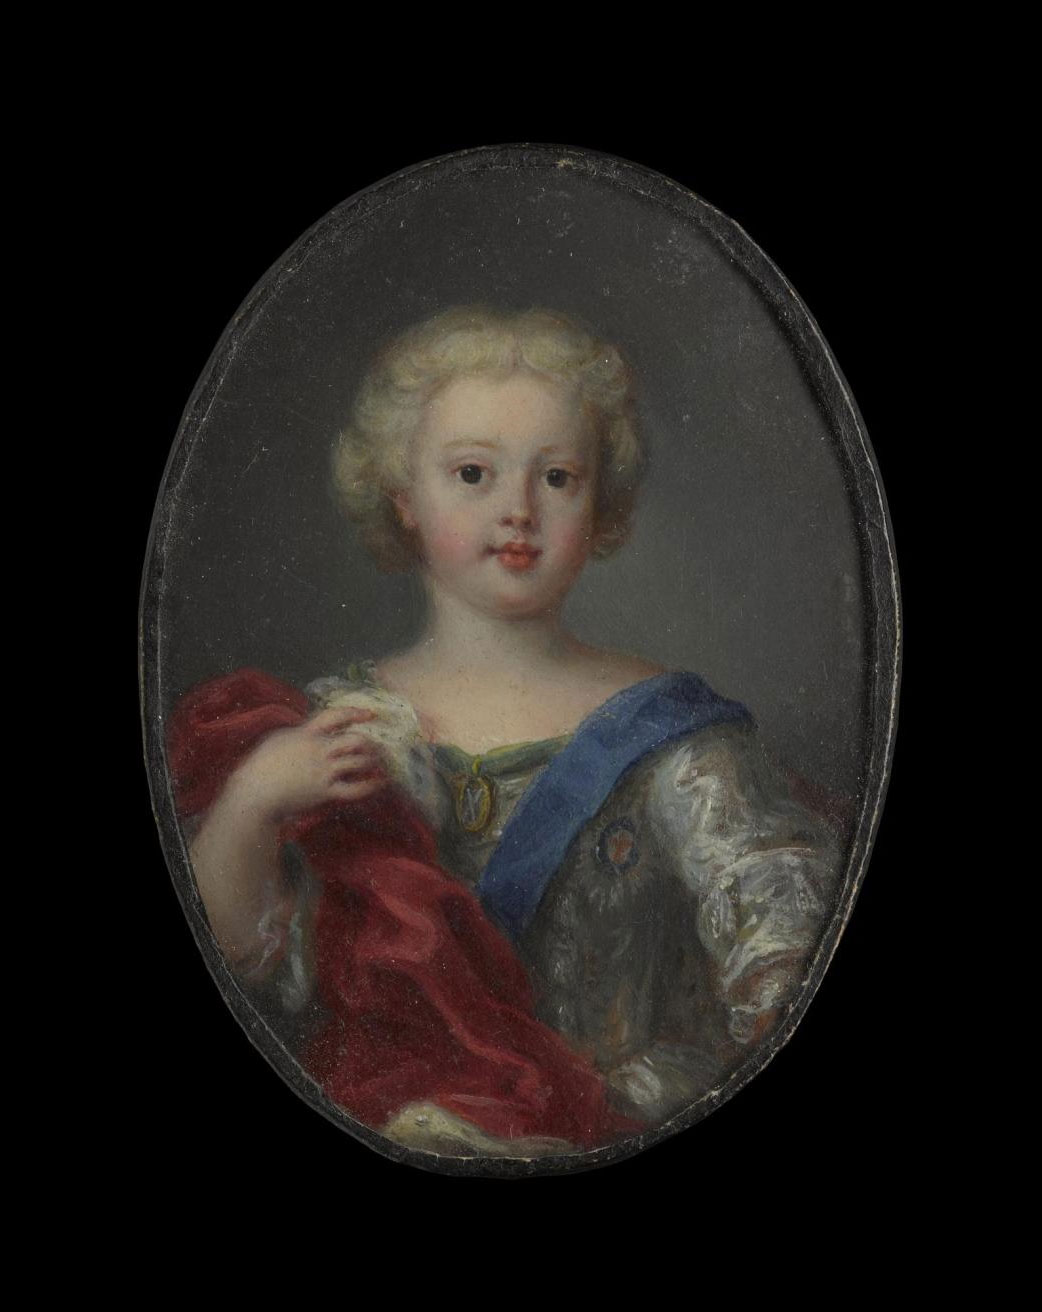 Miniature of Prince Charles Edward Stuart, at around three years old. Portrait miniatures painted in oil on copper plates of the exiled Stuart family, were popular with Jacobite supporters. These were versions of  portraits by the leading court painters.